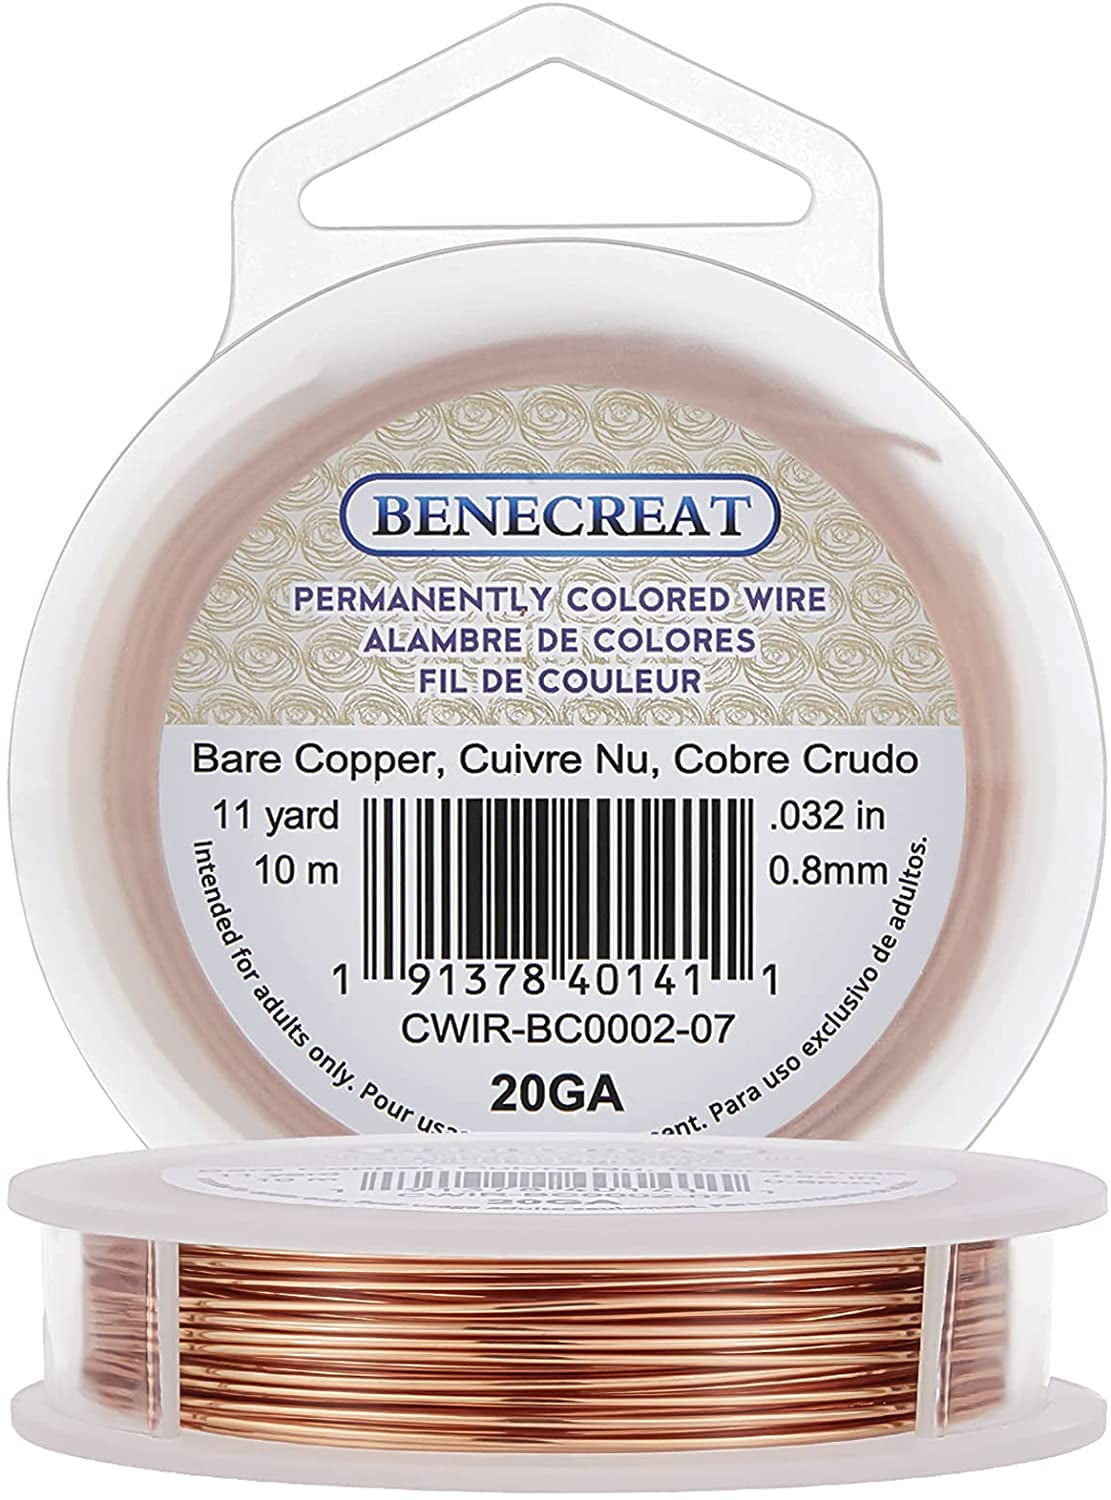 26-Gauge Tarnish Resistant Copper Wire 197-Feet/66-Yard Copper Jewelry Wire  for Crafts Beading Jewelry Making Supplies 